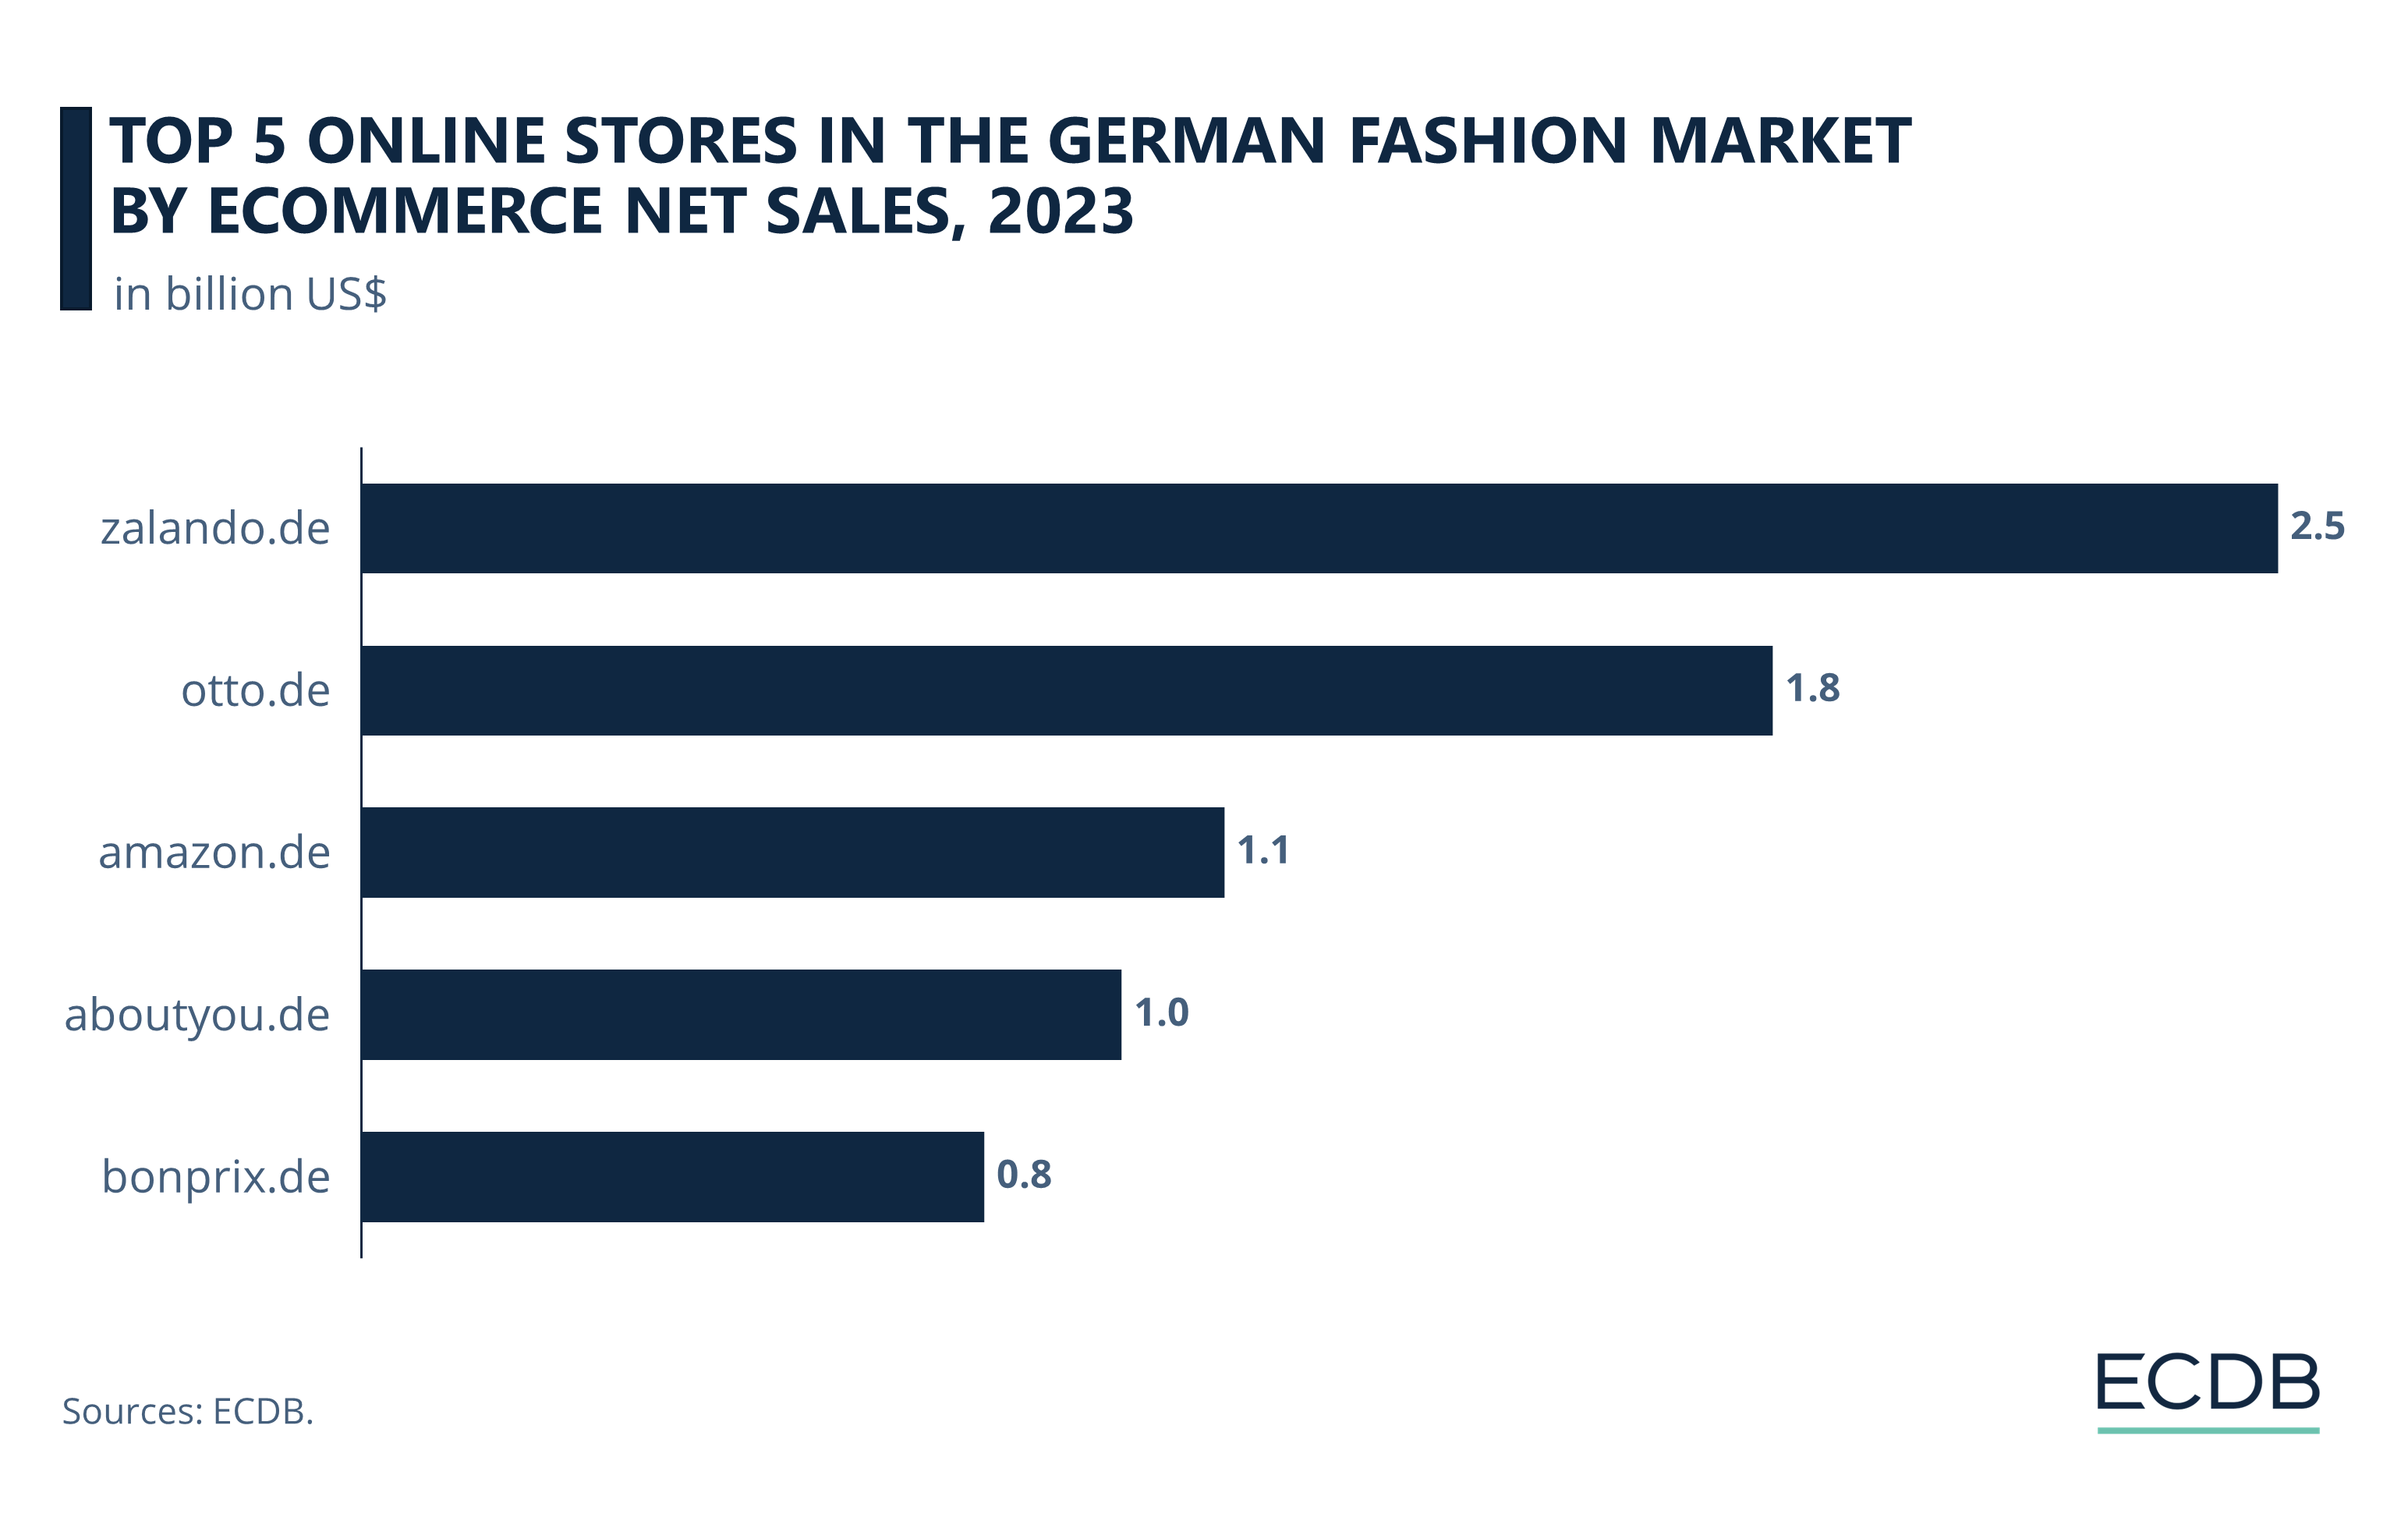 Top 5 Online Stores in the German Fashion Market by eCommerce Net Sales, 2022